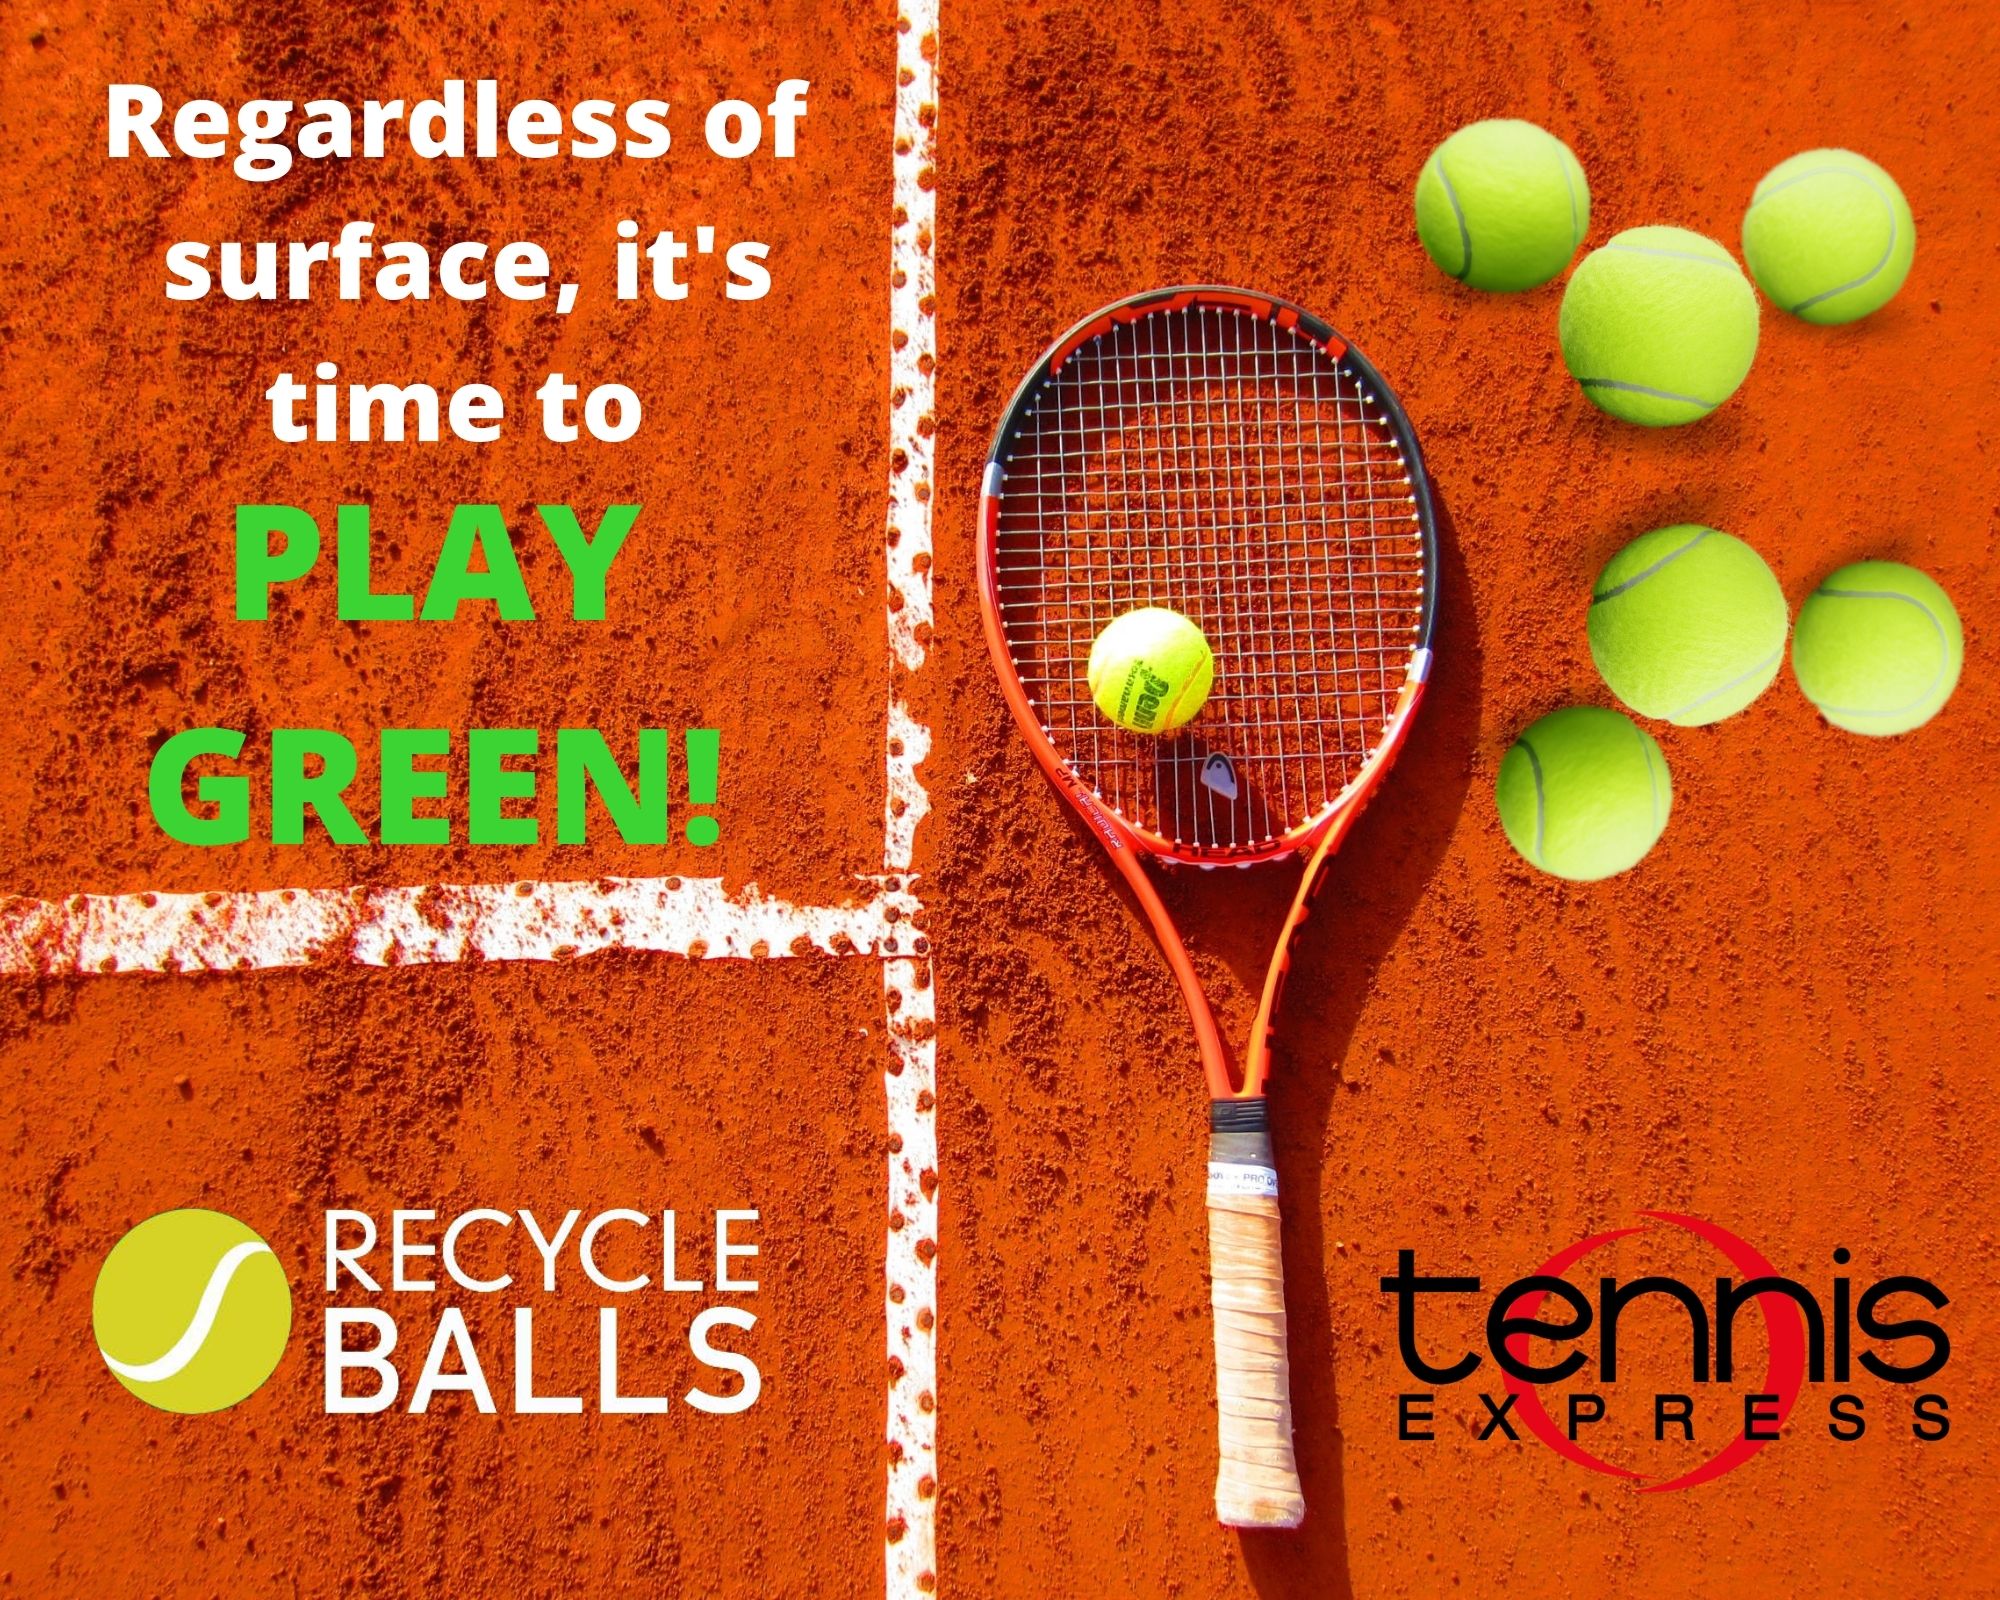 Tennis Express Partners with RecycleBalls.org and Encourages Players to Go Green